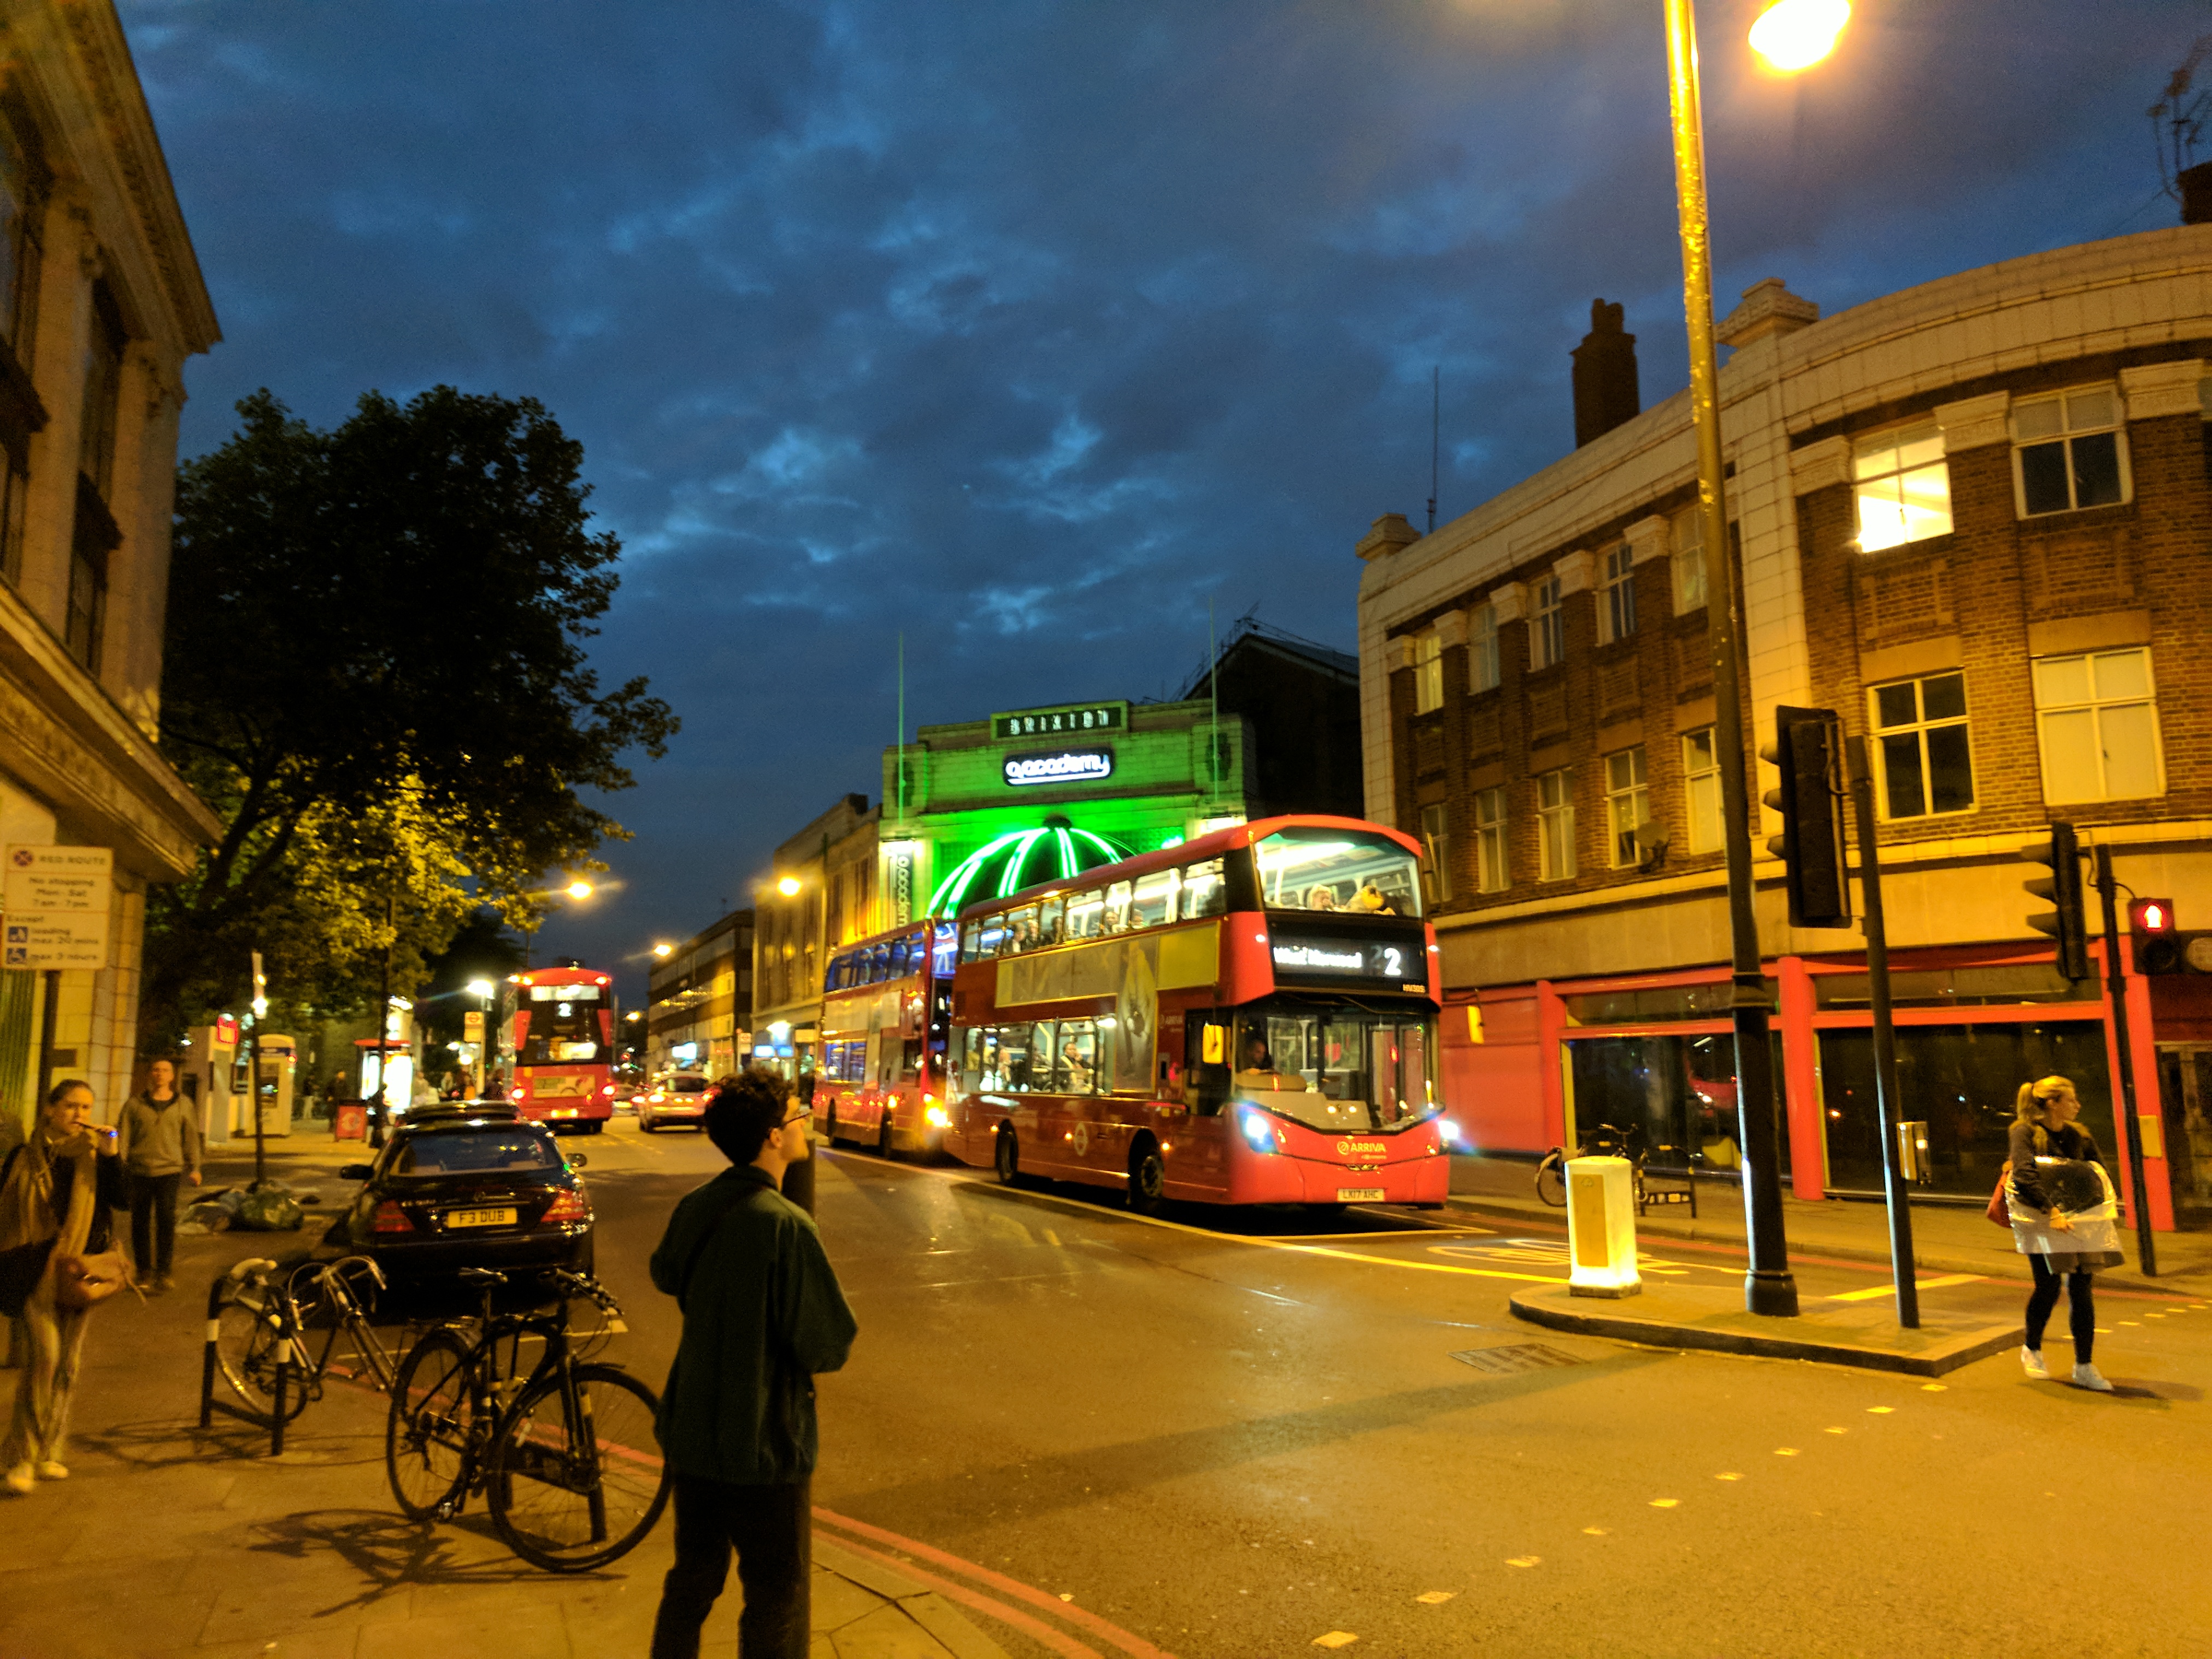 Brixton Academy illuminated in neon green, a double decker london bus in the foreground.